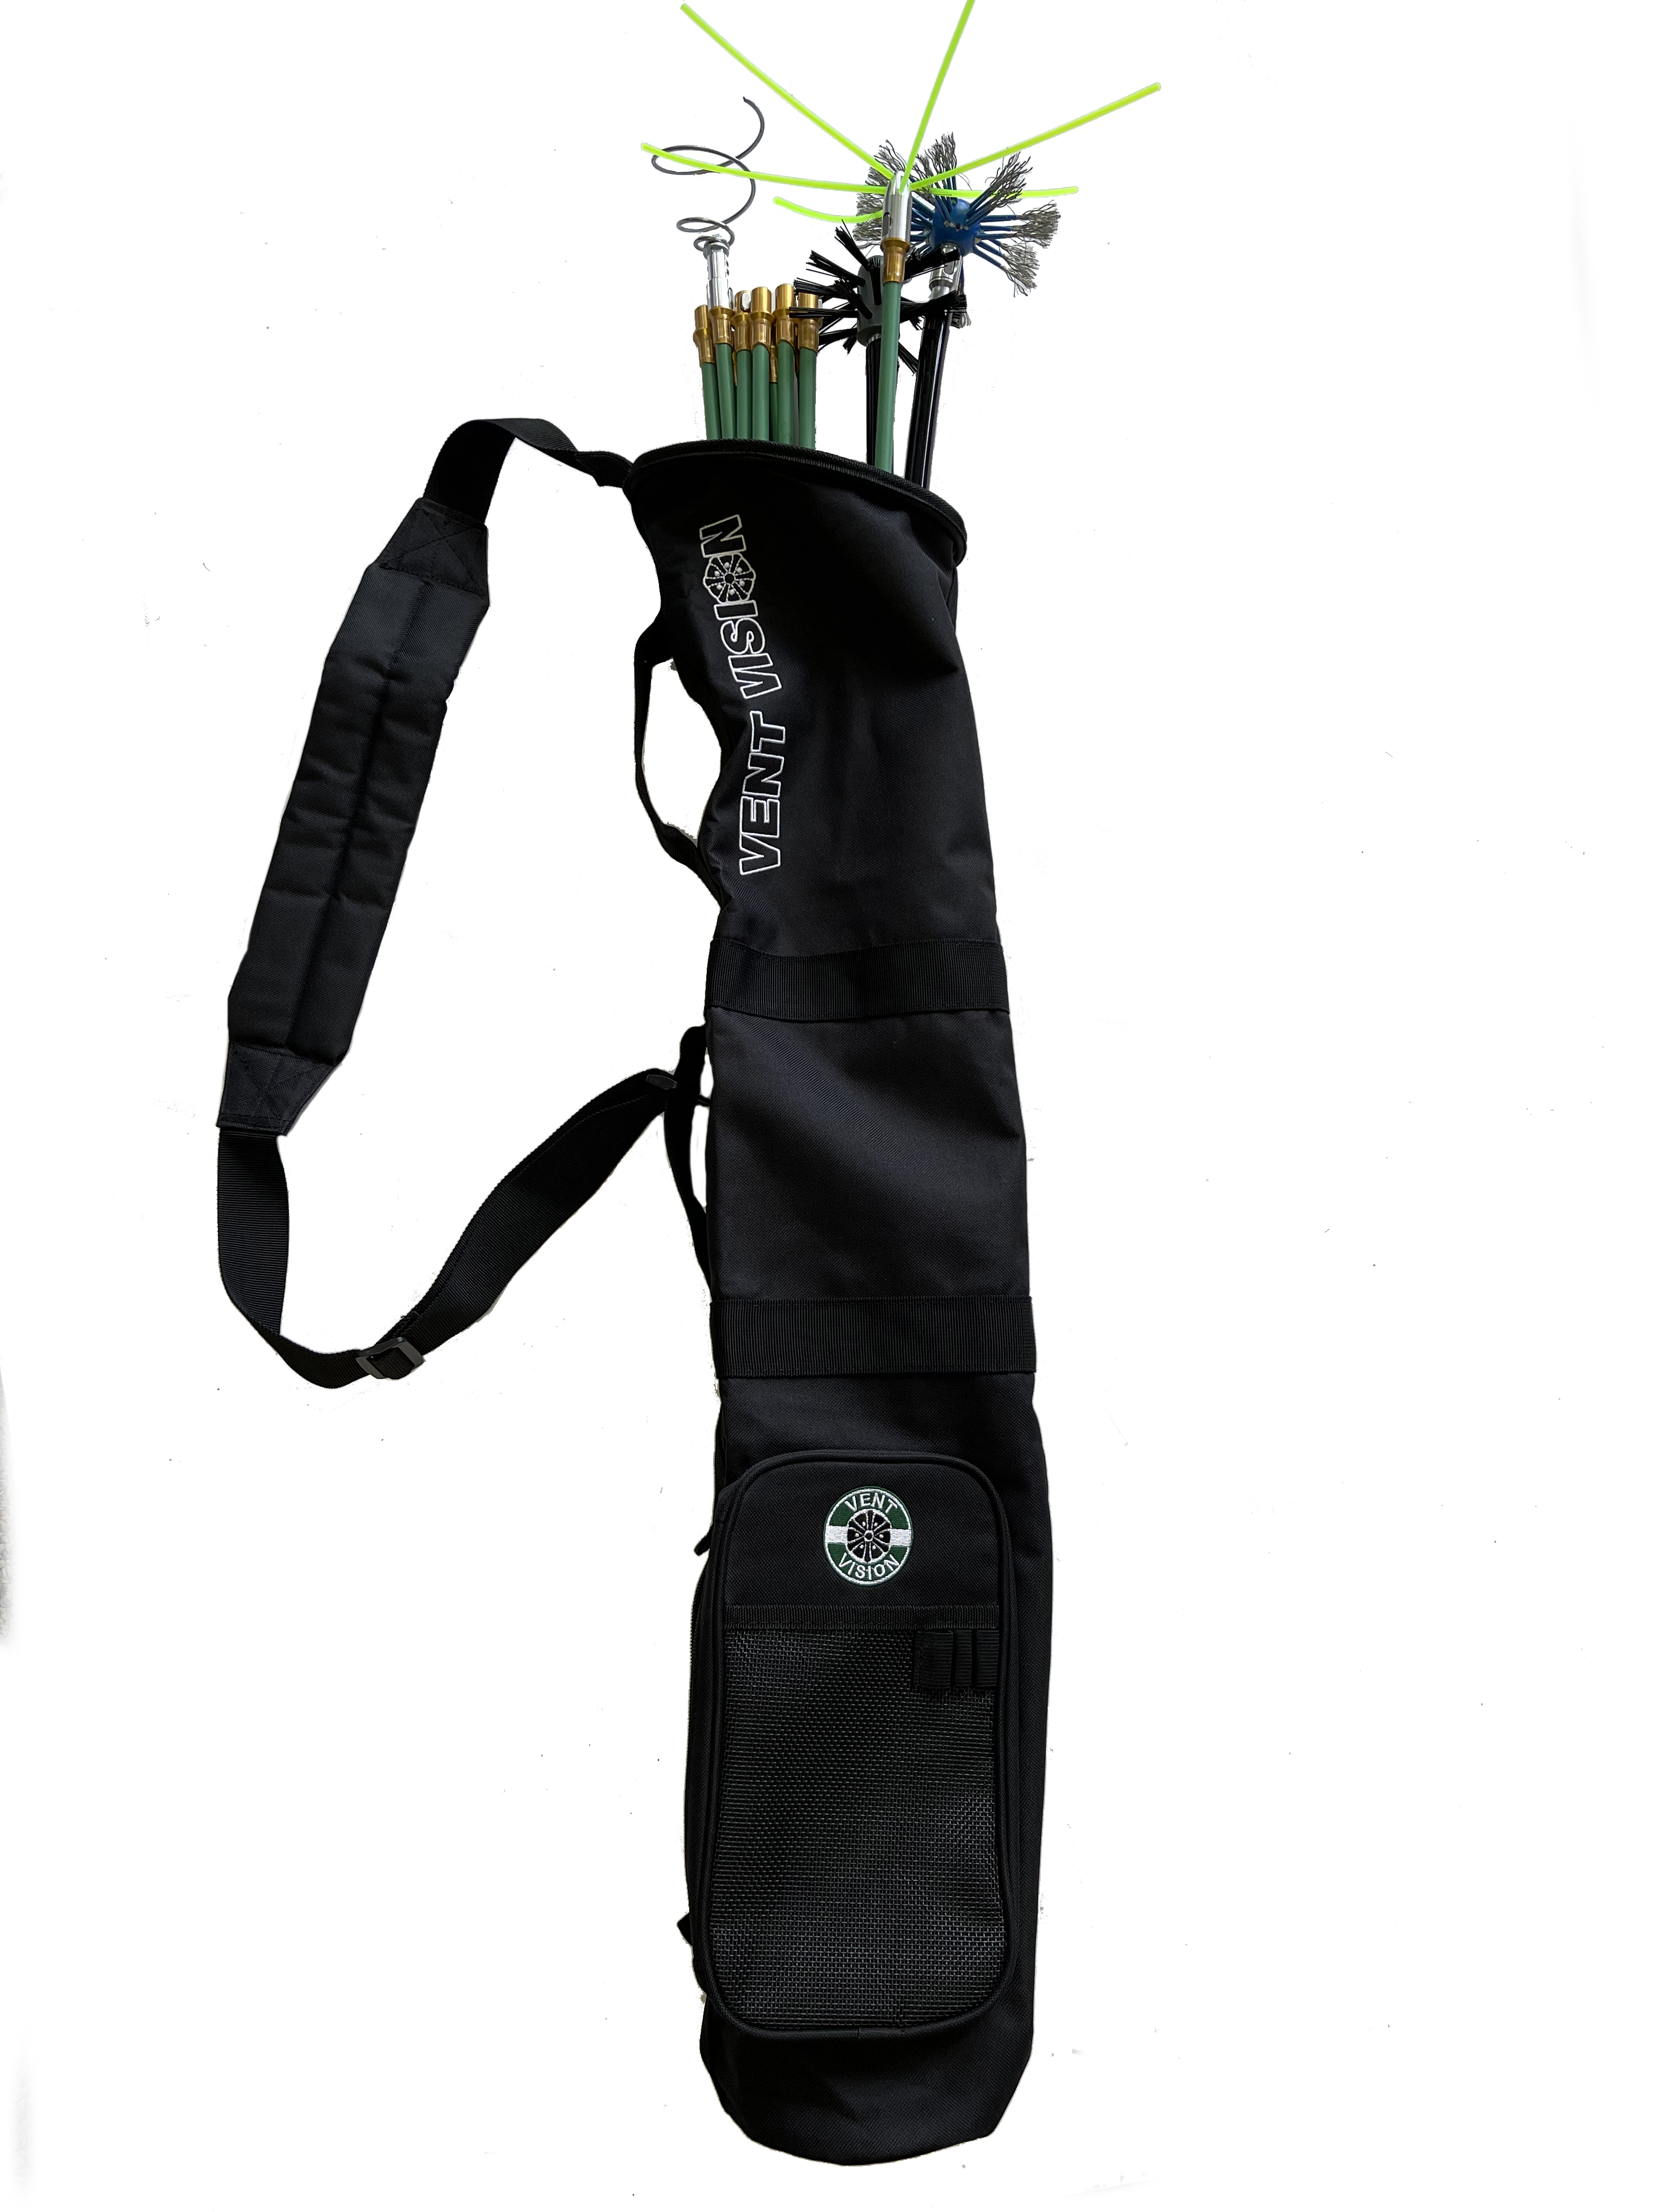 7703 Vent Vision Rod Caddy Bag, 3' open top with two pockets and shoulder strap